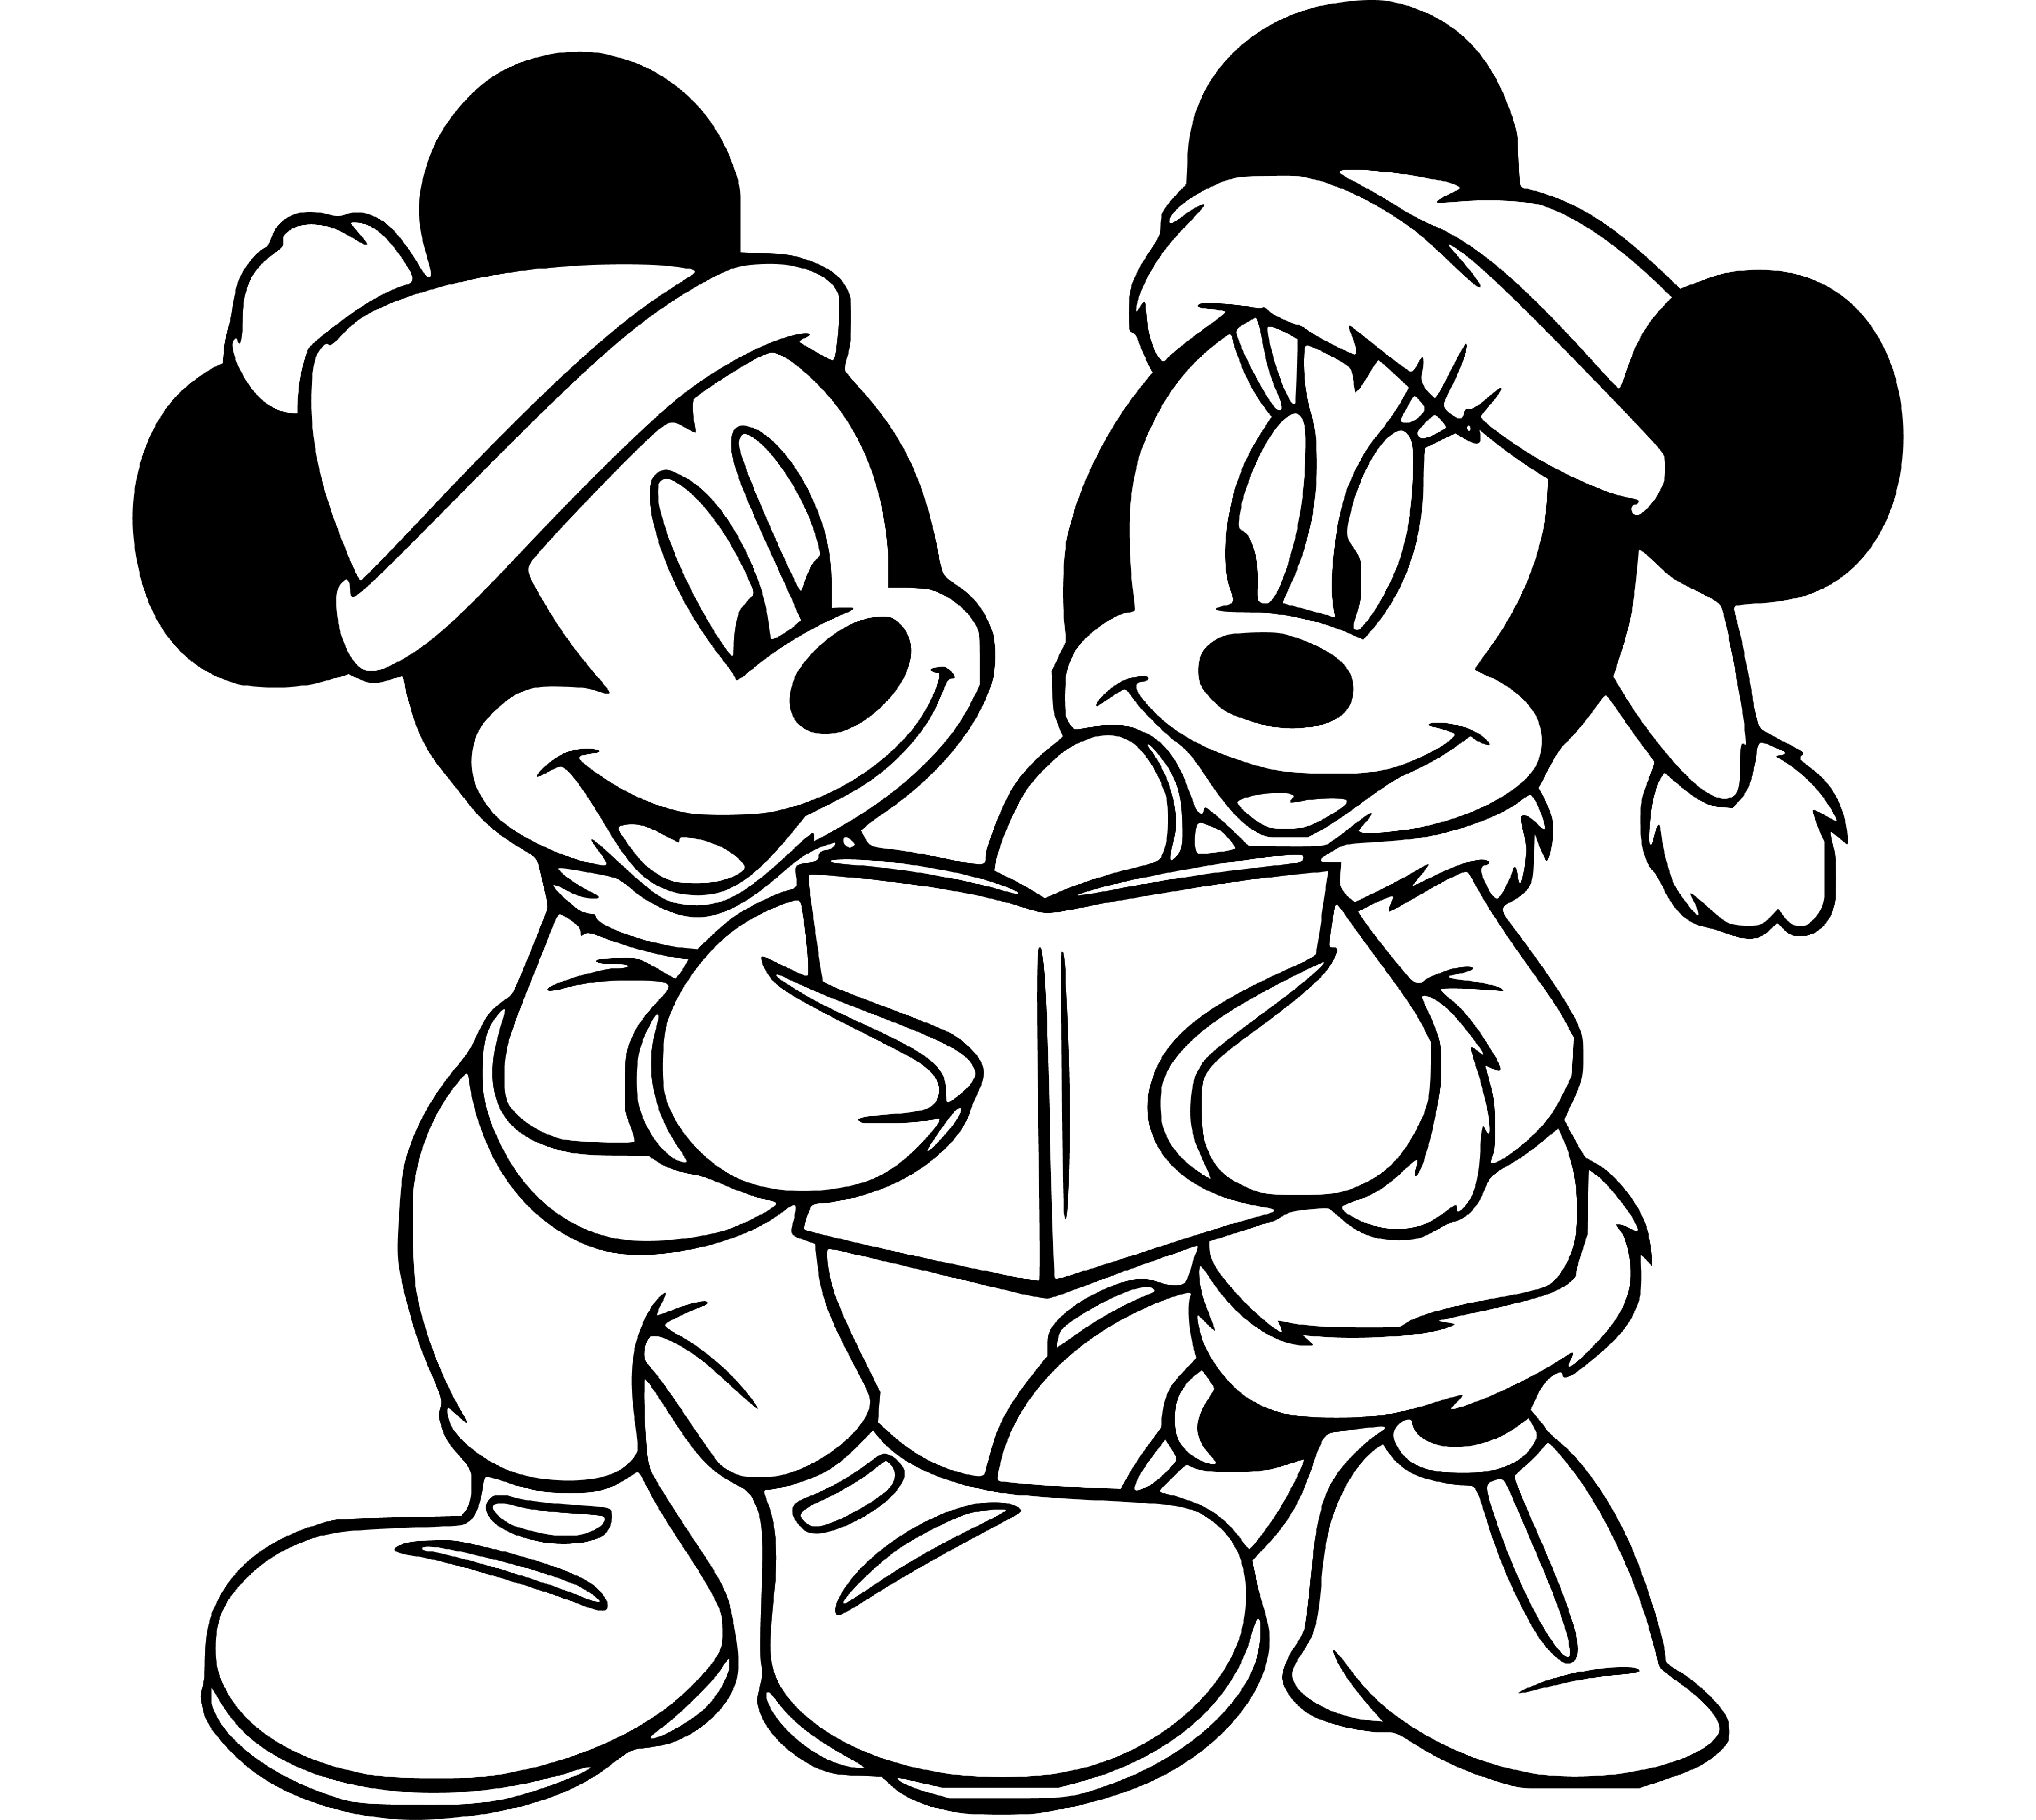 Mickey and Minnie Mouses reading a book drawing page - SheetalColor.com